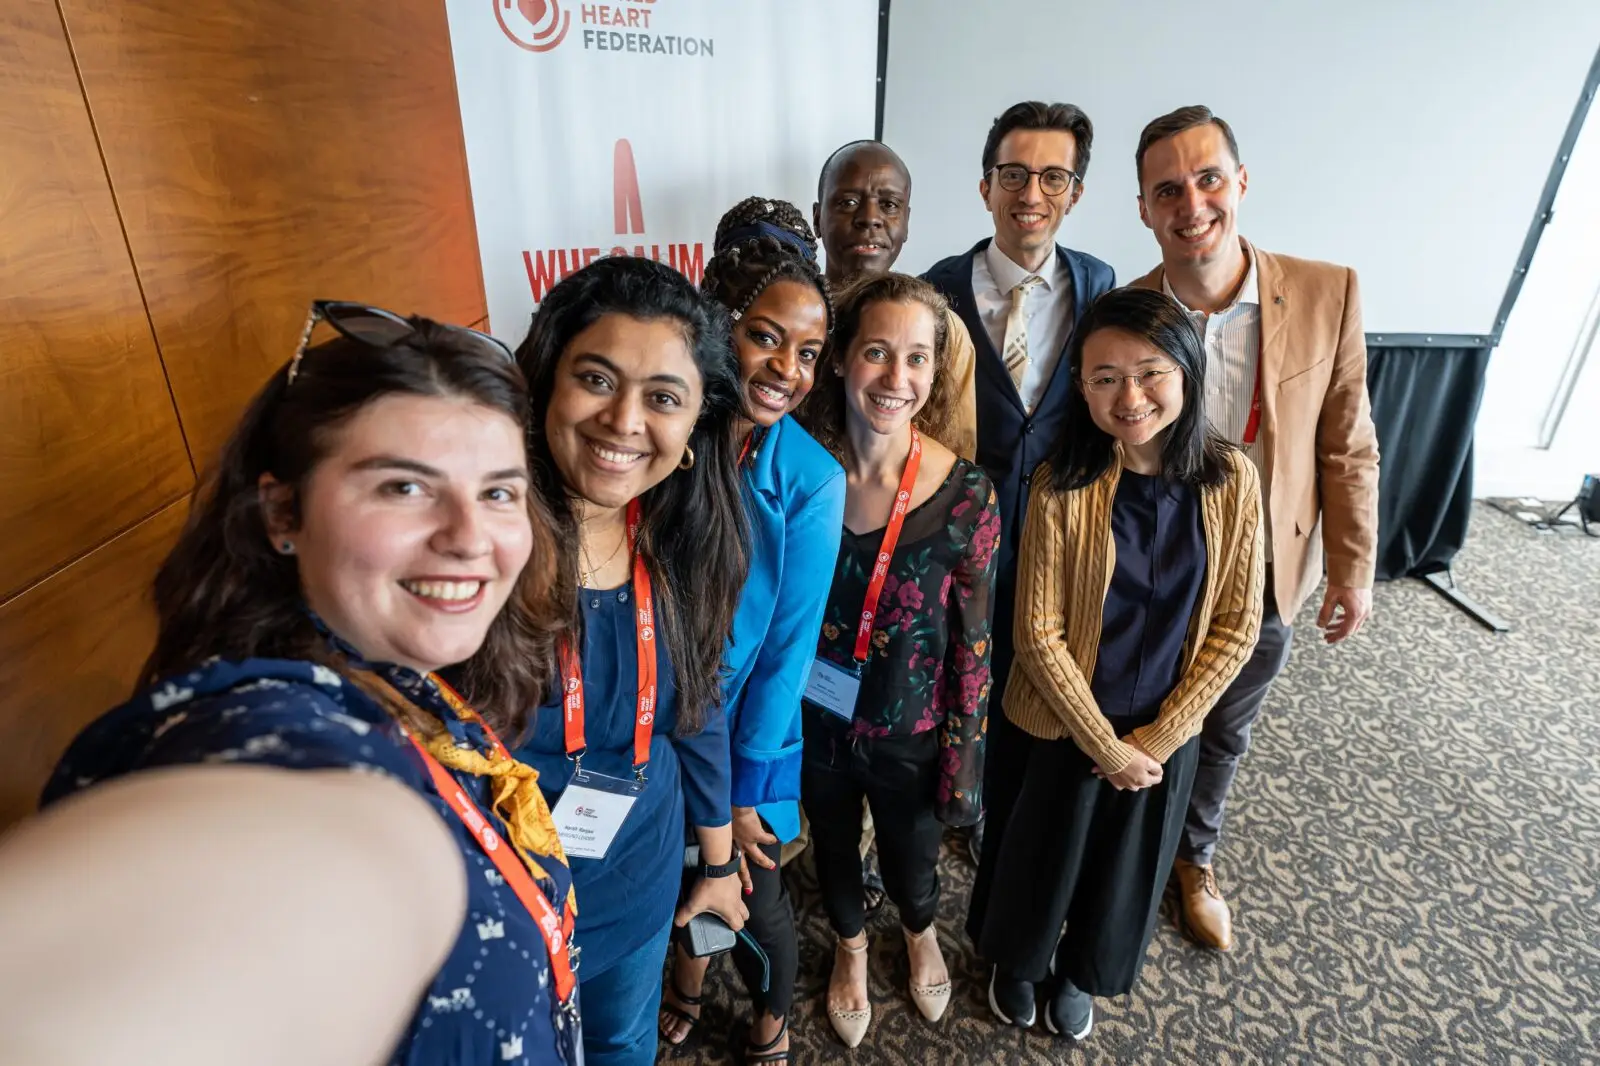 World Heart Federation emerging leaders announced